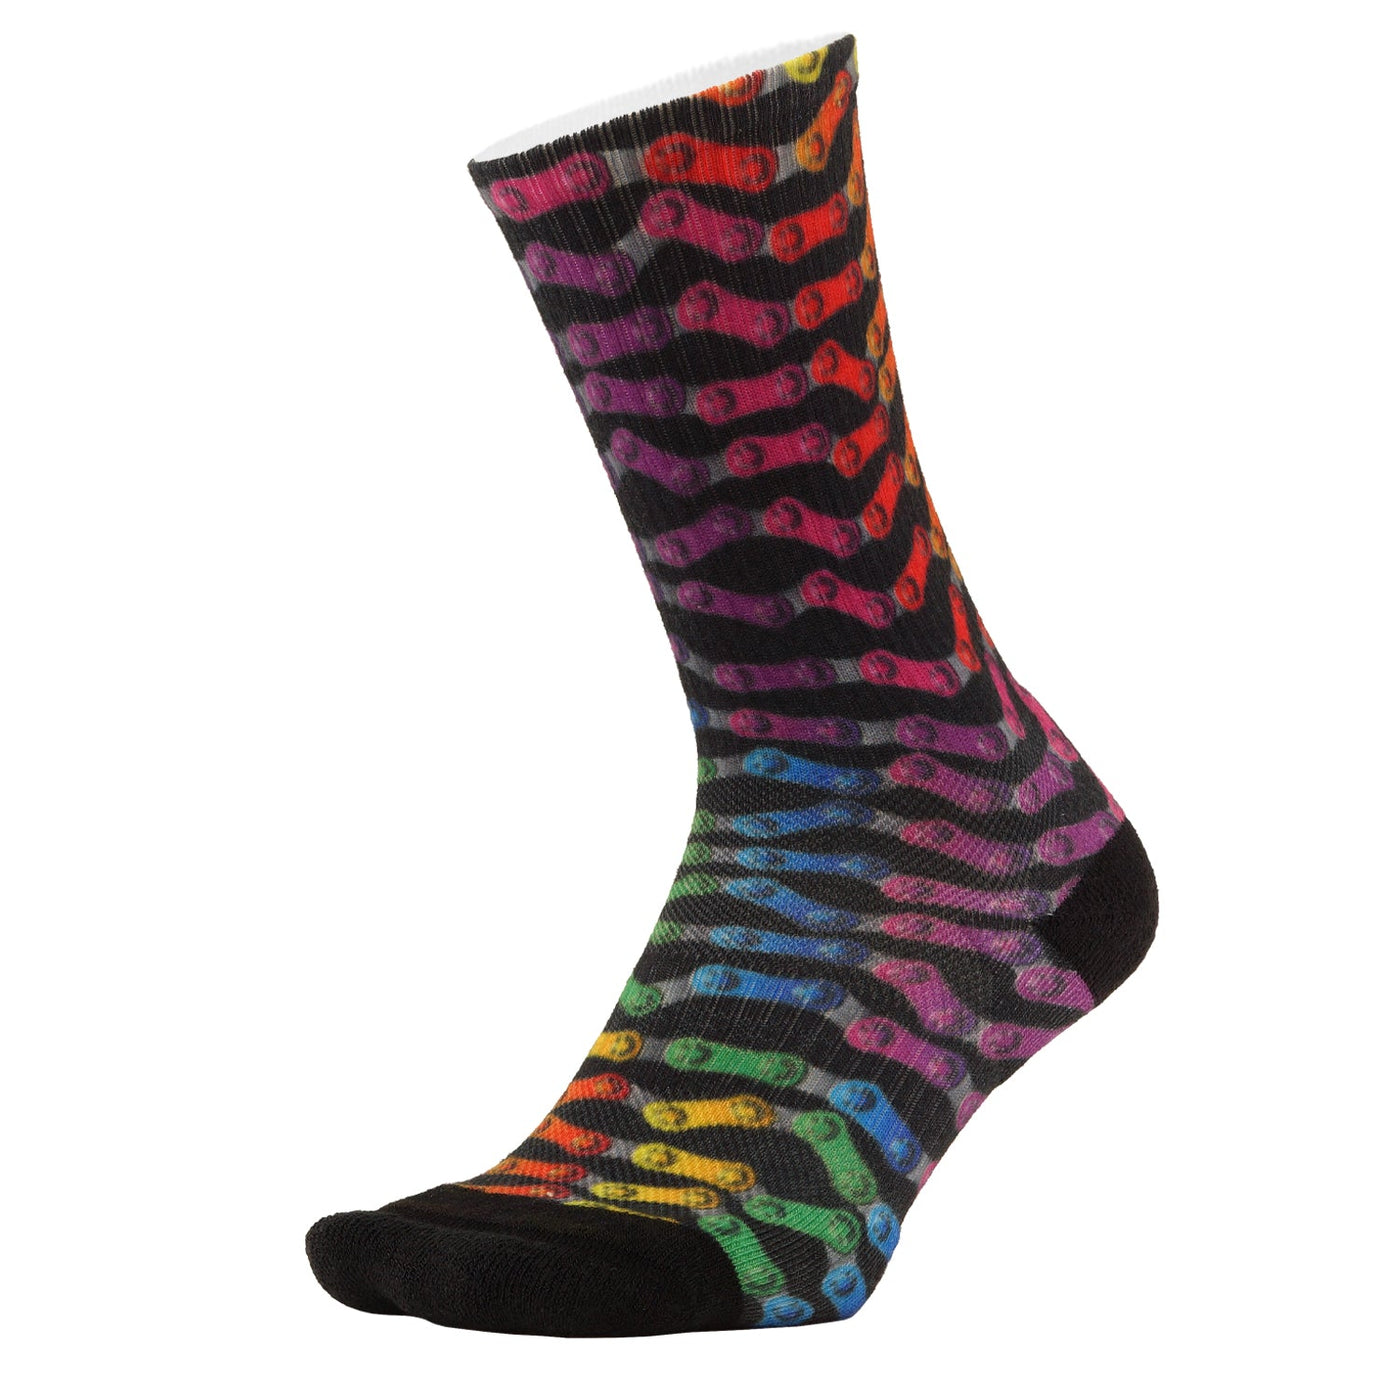 Sub360 All Day: Colors - DeFeet